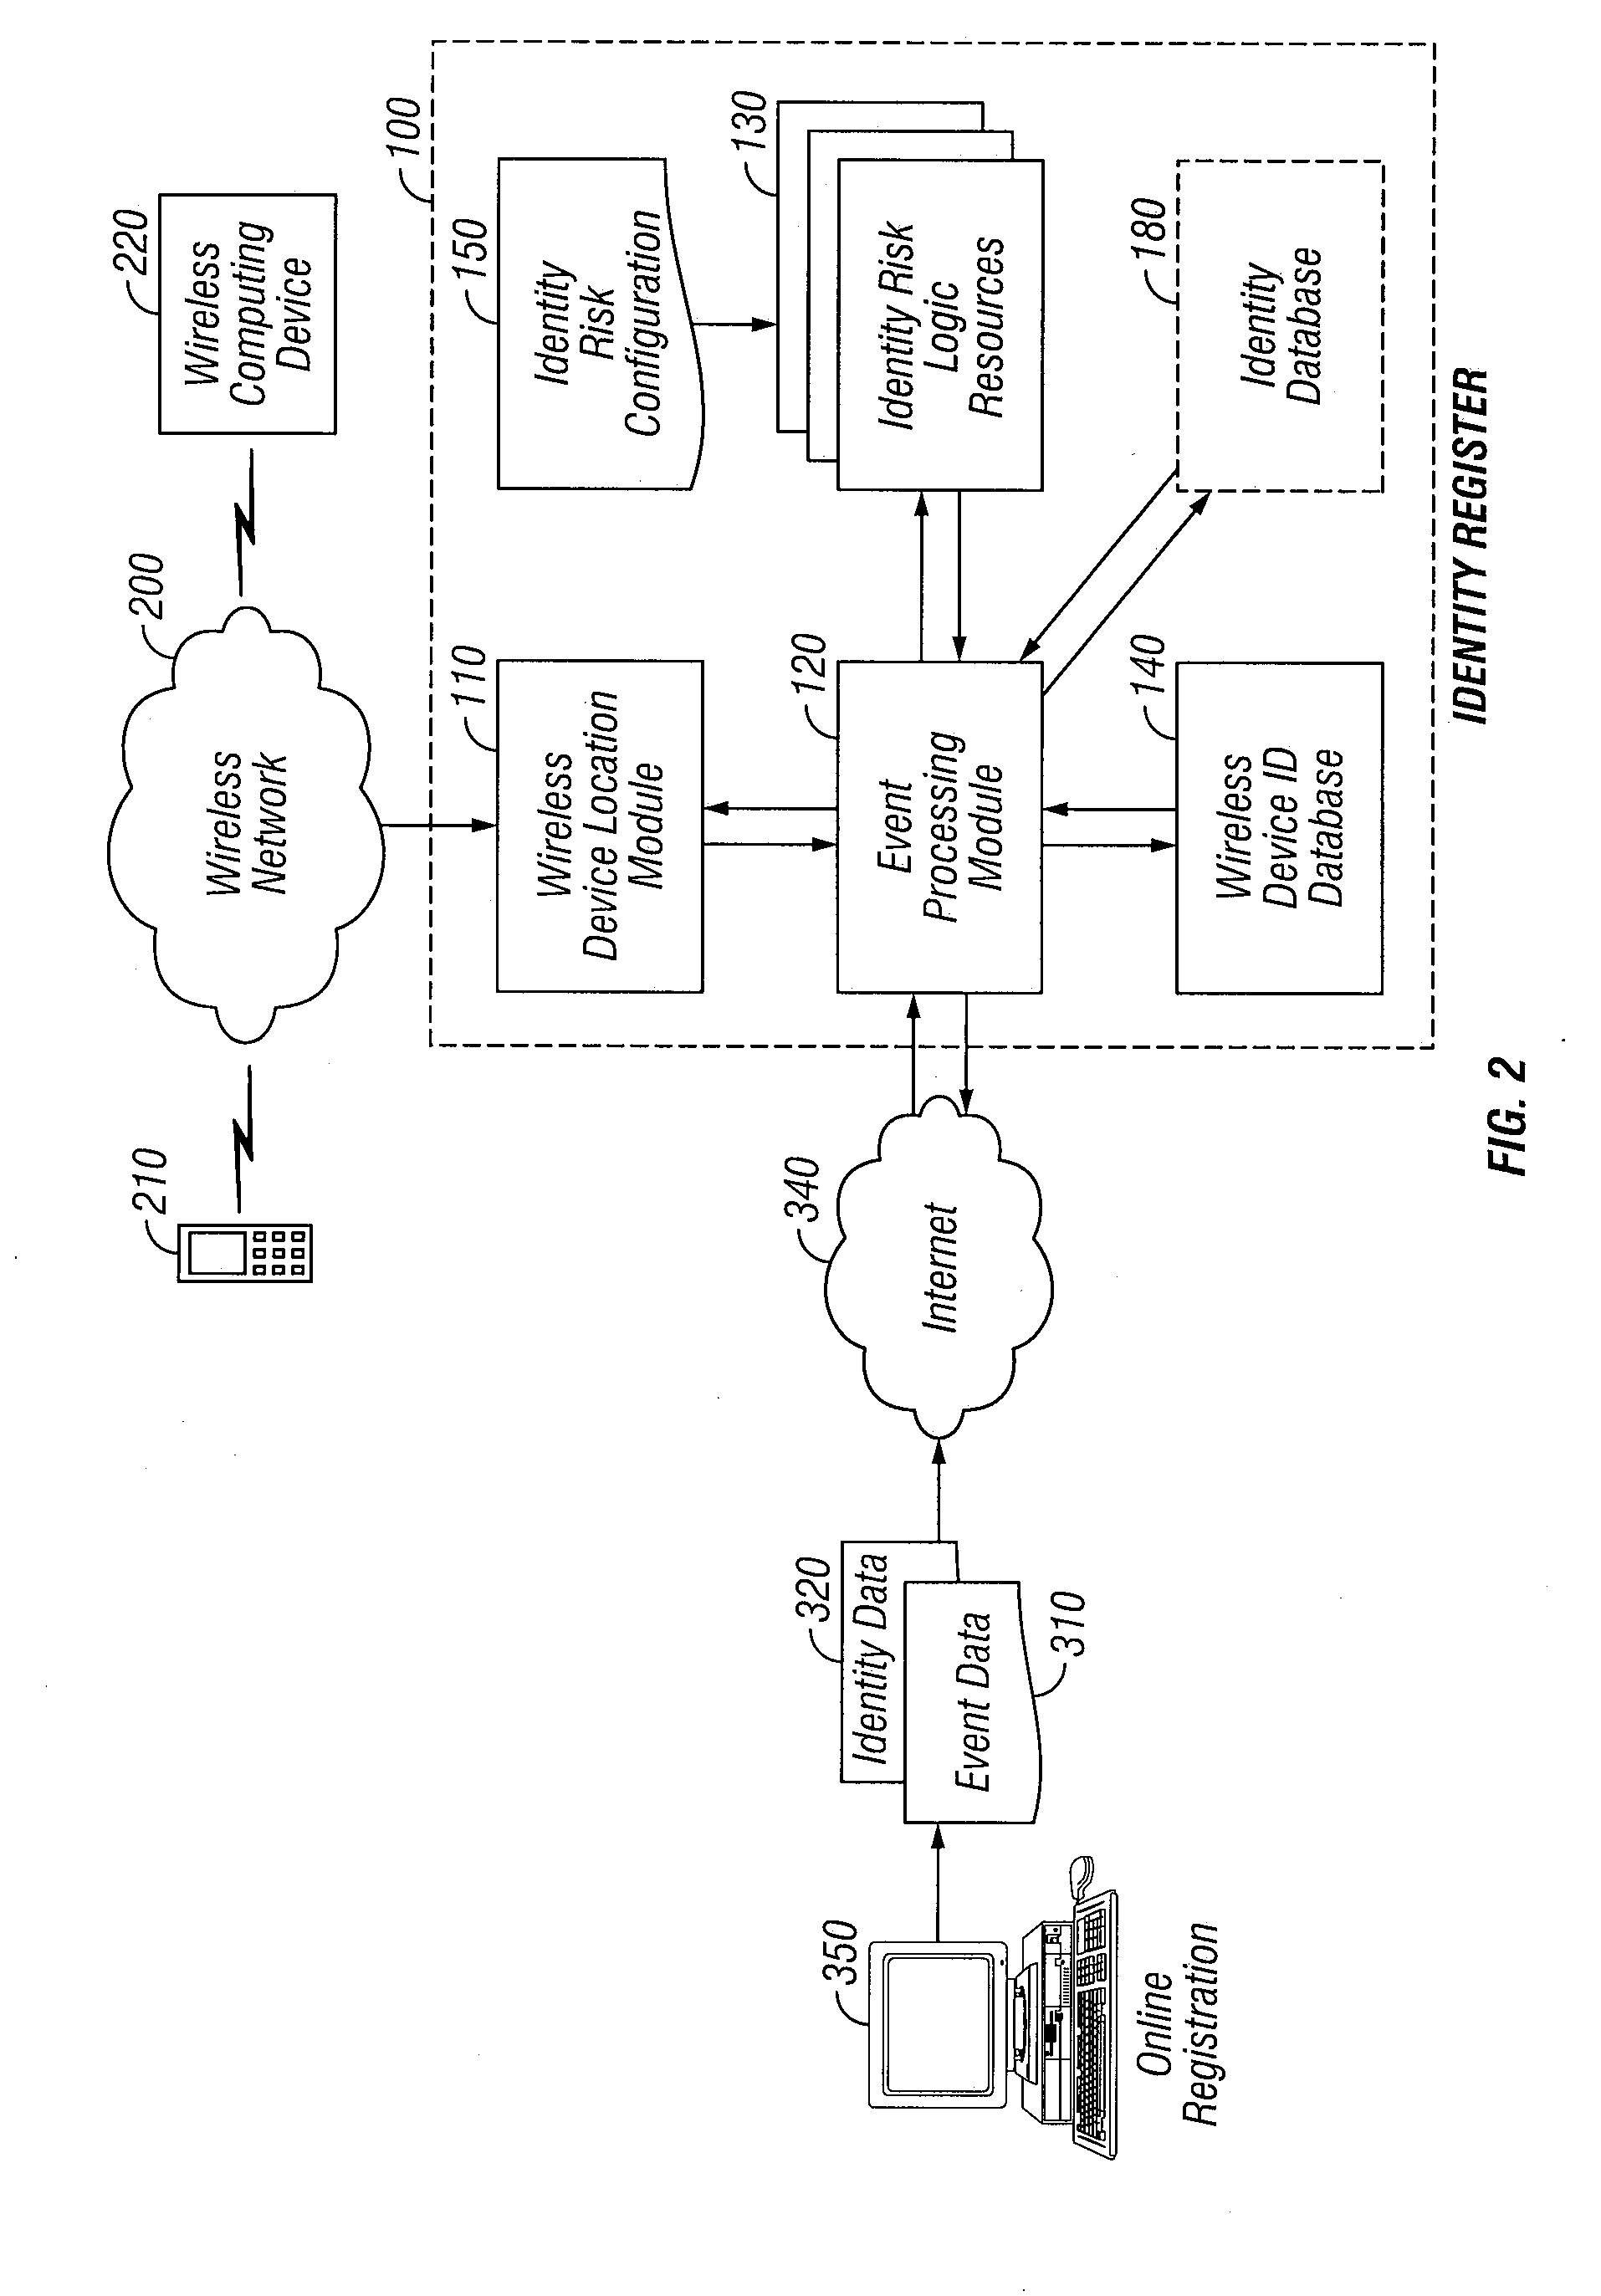 System and method for authenticating a user of multiple computer applications, networks or devices using a wireless device